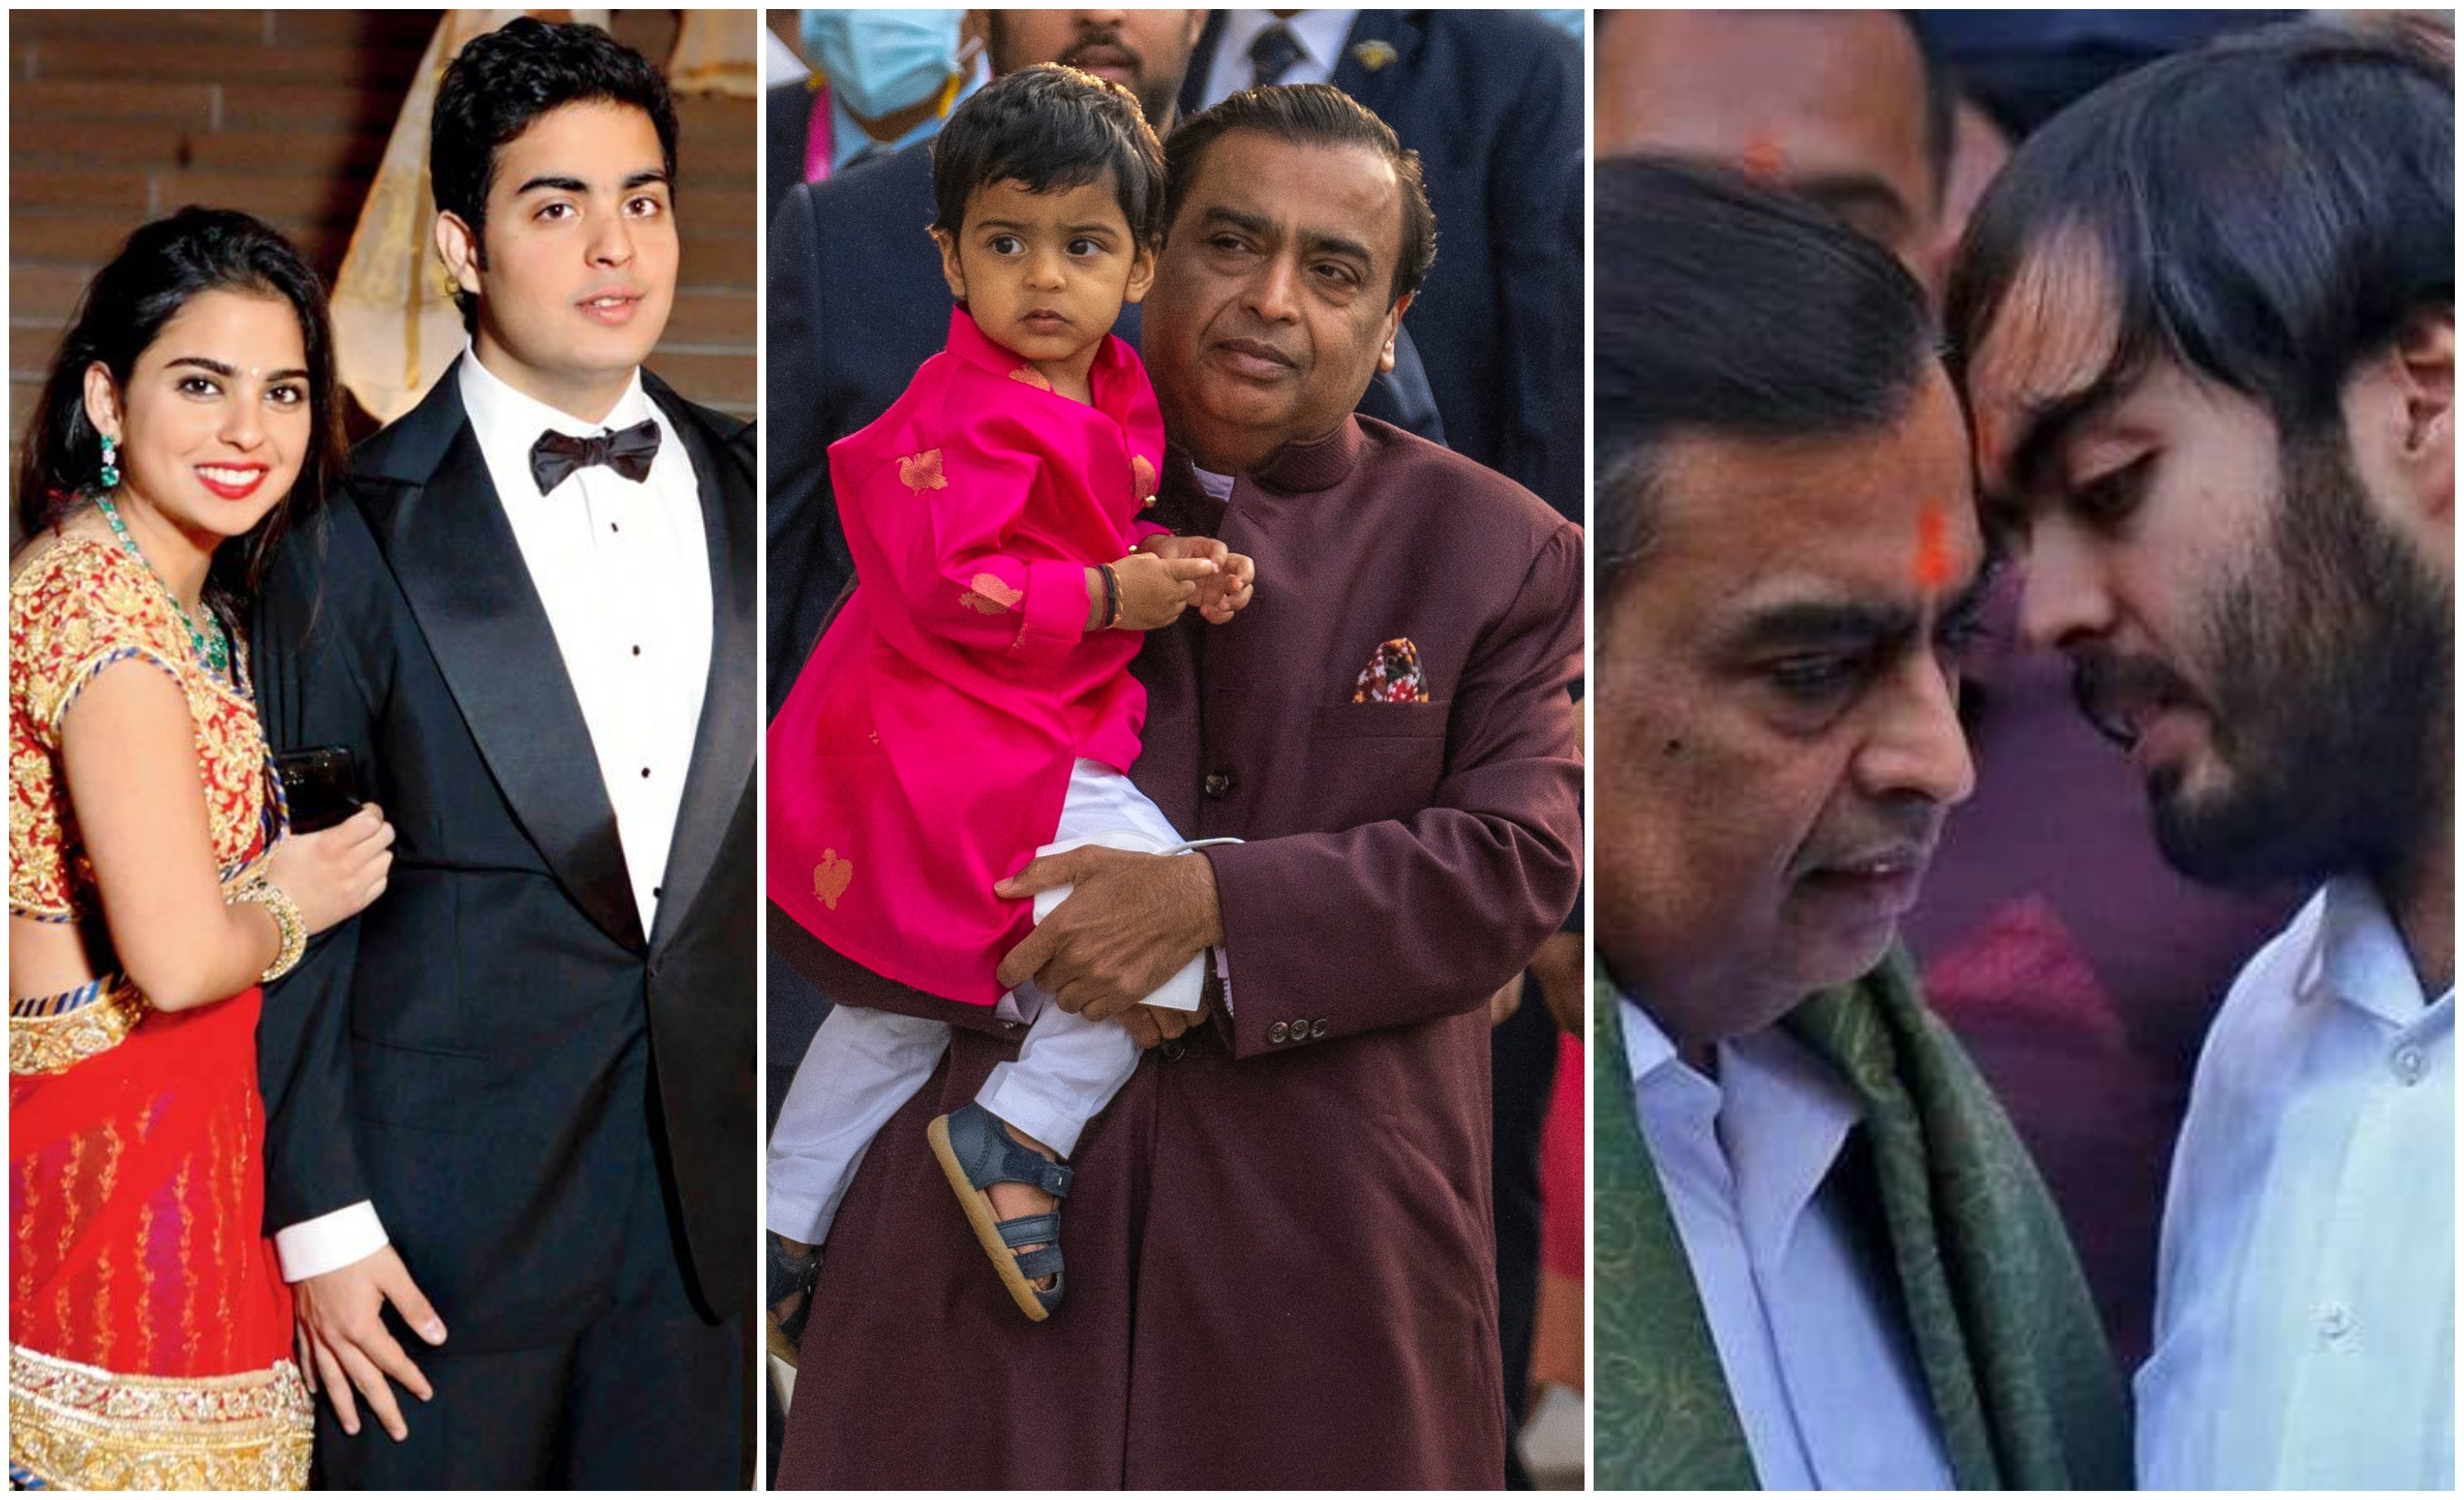 The future of Mukesh Ambani’s Reliance has been revealed, and he’s keeping it in the family as expected. Photos: Instagram / @ambanifamily, AP